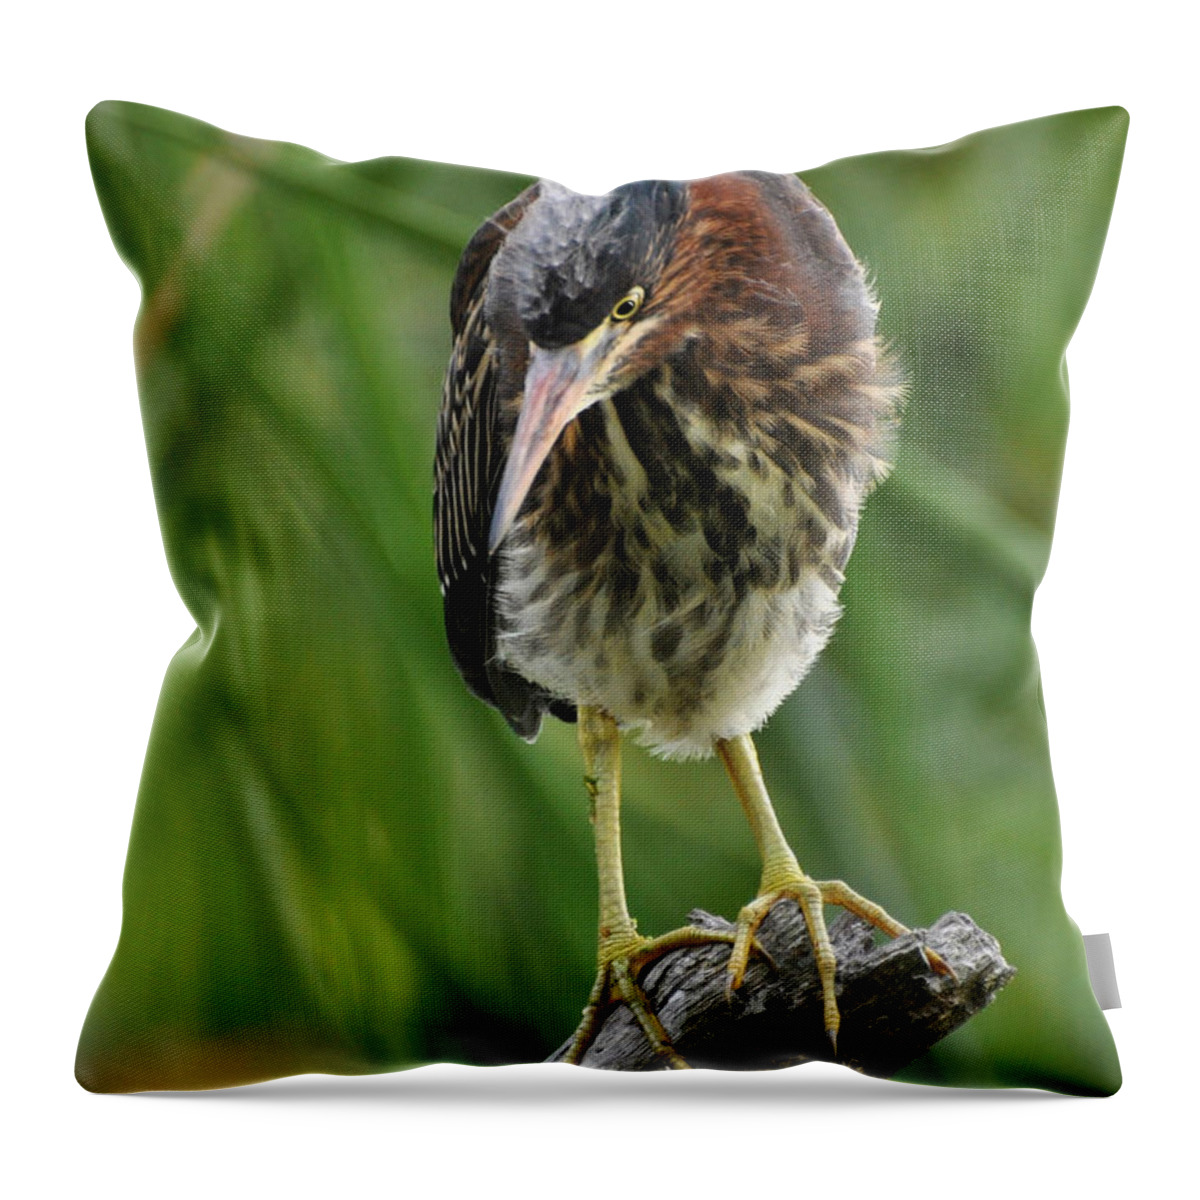 Heron Throw Pillow featuring the photograph Baby Greenbacked Heron by Kathy Baccari